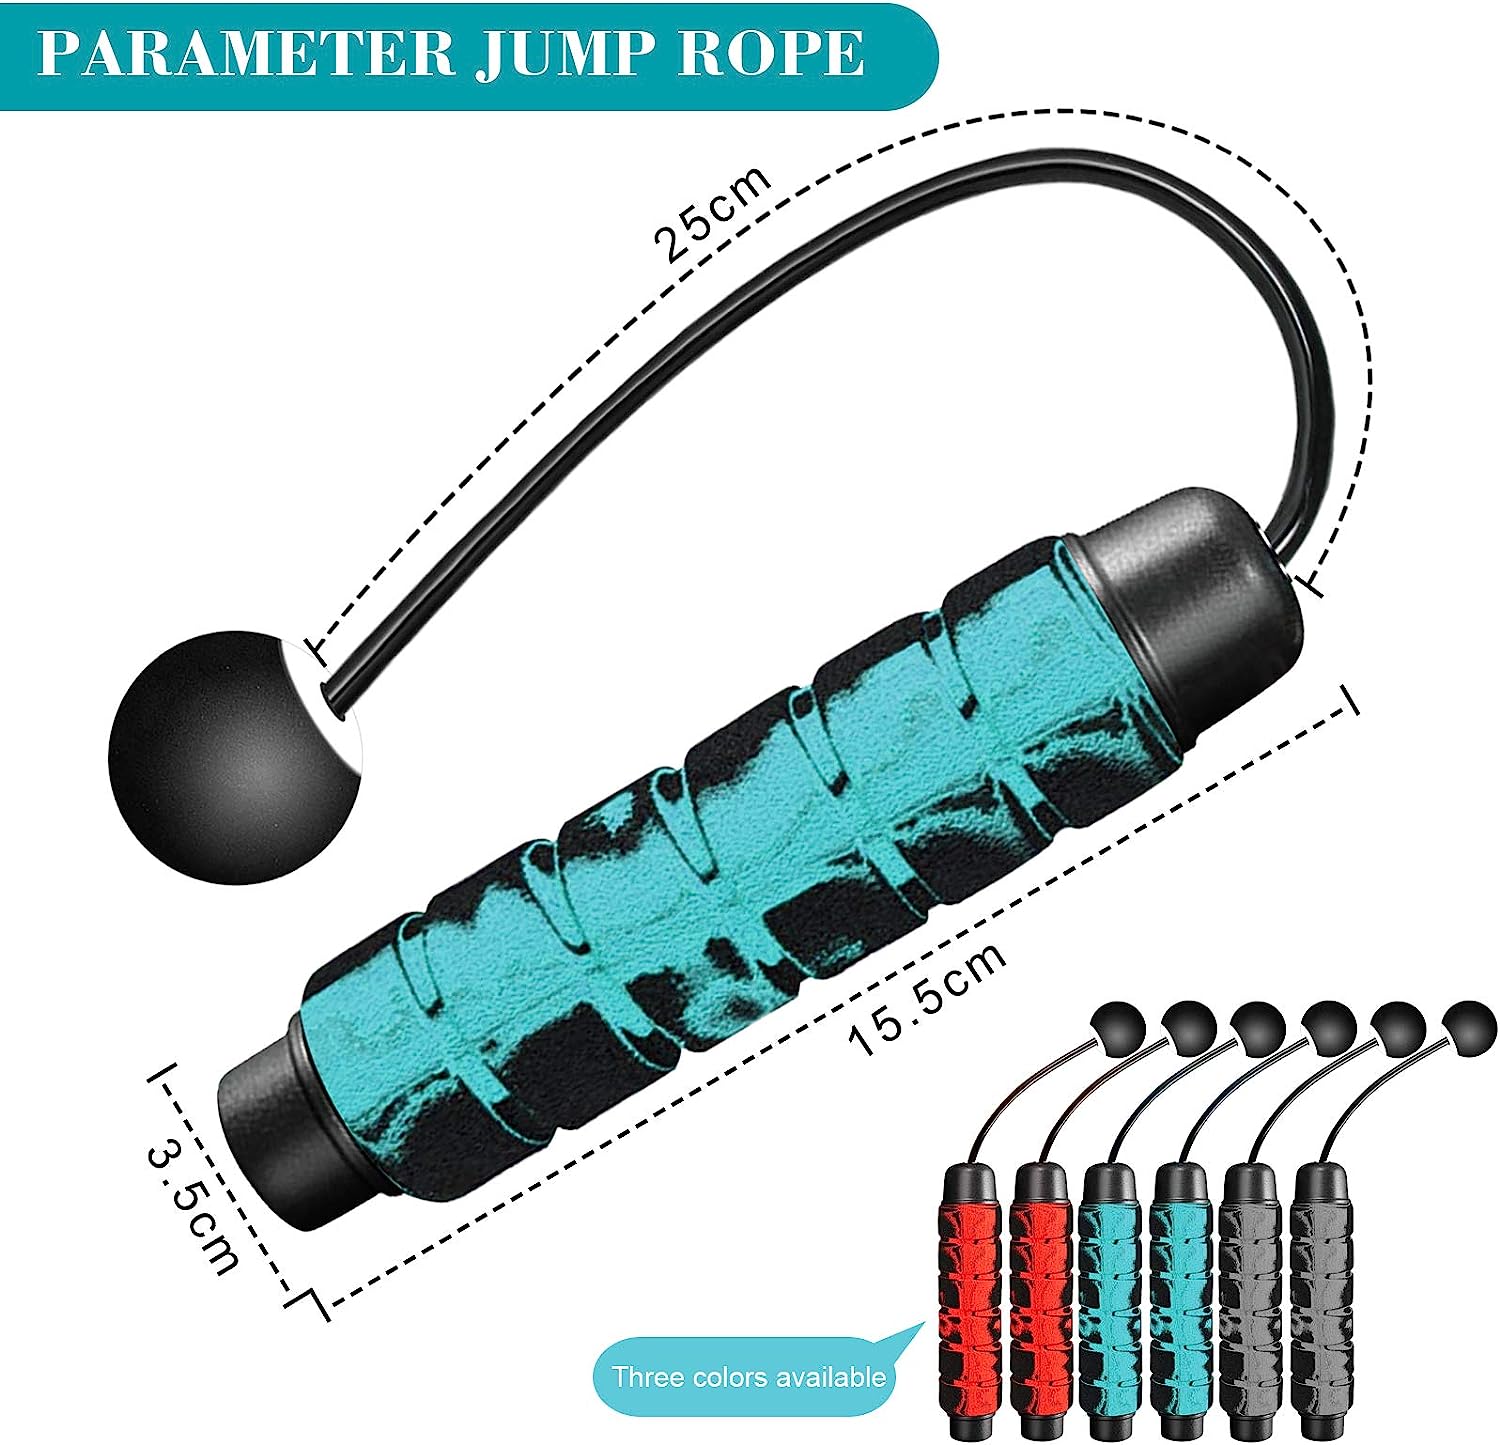 Redify Weighted Cordless Jump Rope for Fitness[Suitable for Different Ages and Levels] Ropeless Jump Rope for Boxing MMA WOD Training, BOD Rope Beachbody MBF,High Speed Rope Skipping for Narrow Space